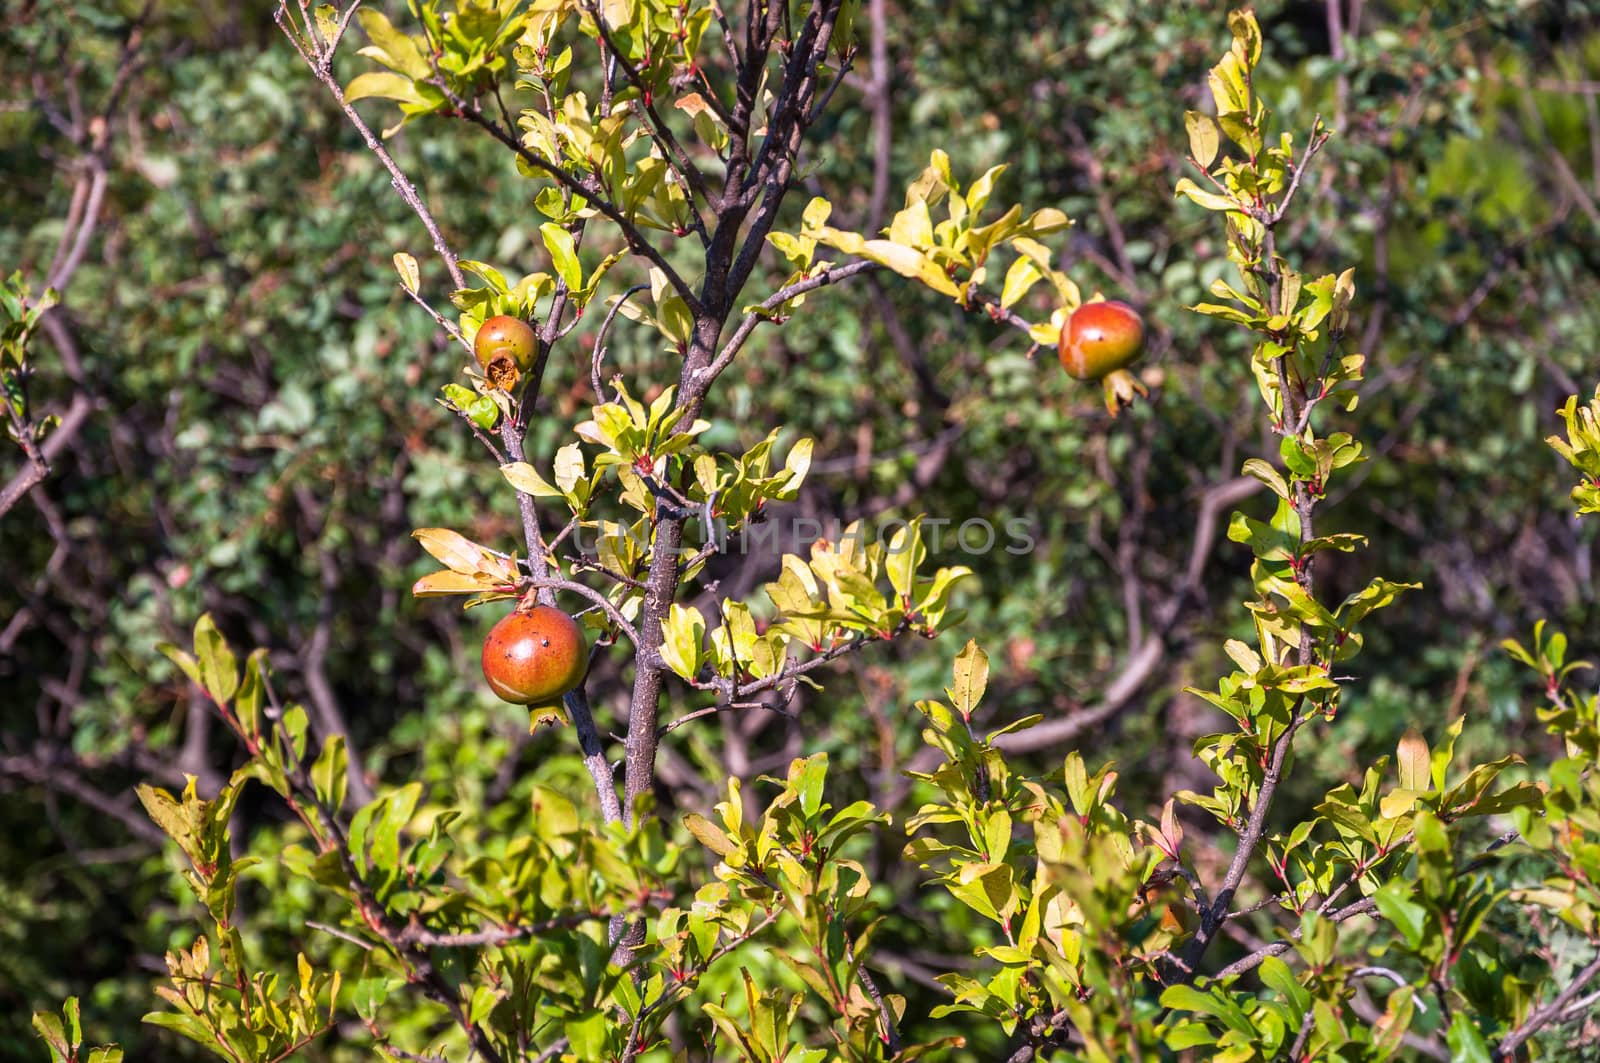 Red pomegranate fruit ripening in the sun.